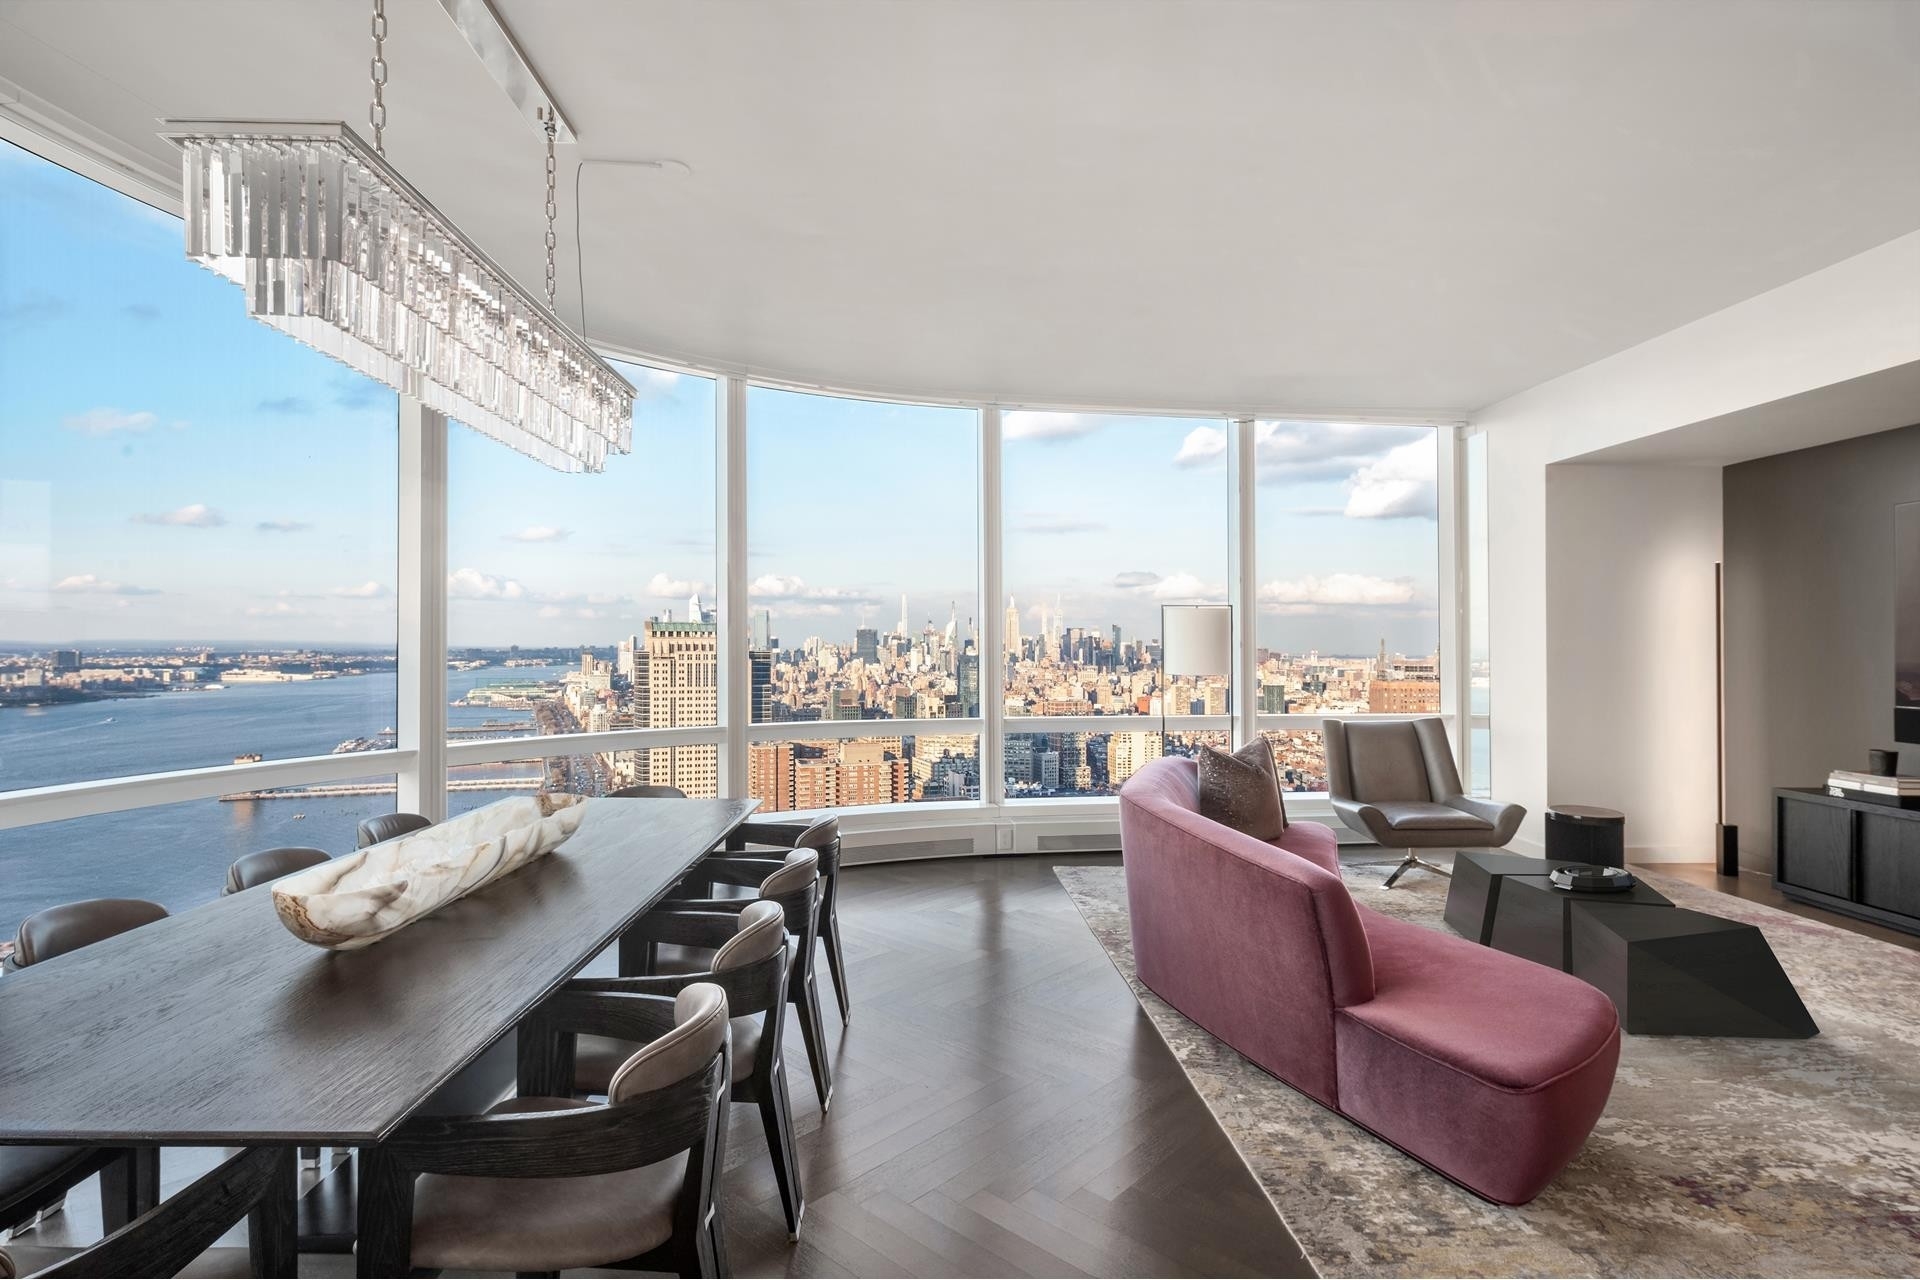 Property at One Eleven Murray Street, 111 MURRAY ST, 48WE TriBeCa, New York, NY 10007